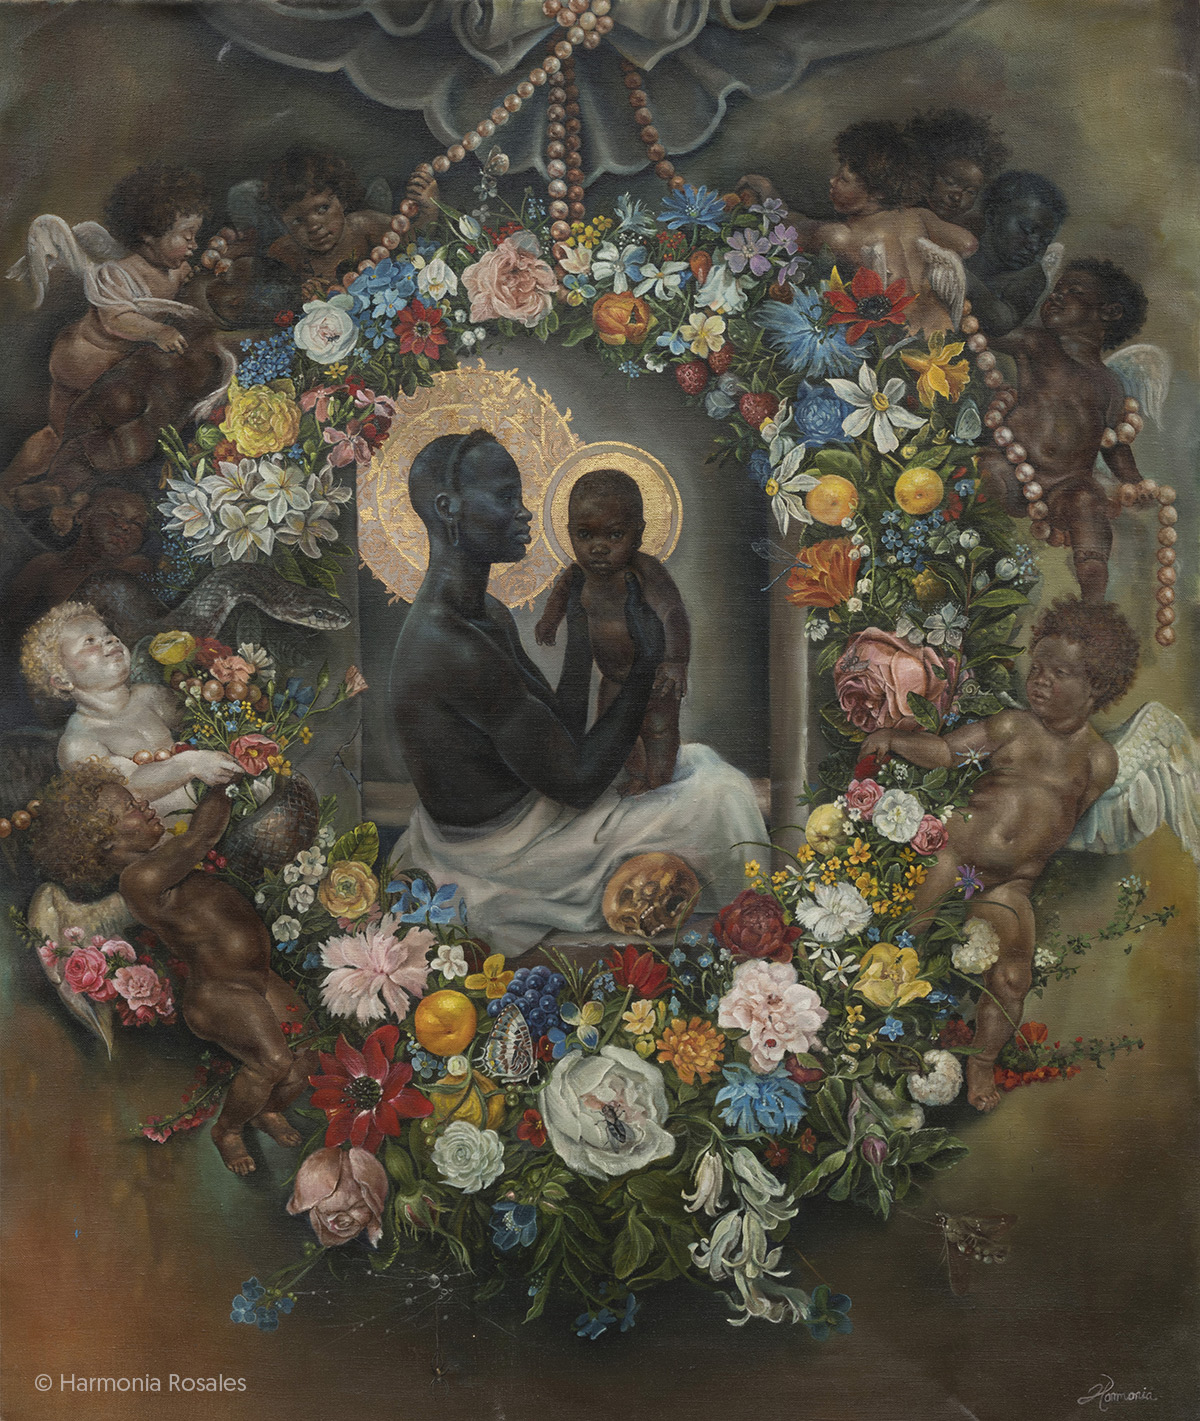 Powerful Portraits Of Black Figures Painted In The Classical European Style By Harmonia Rosales 8